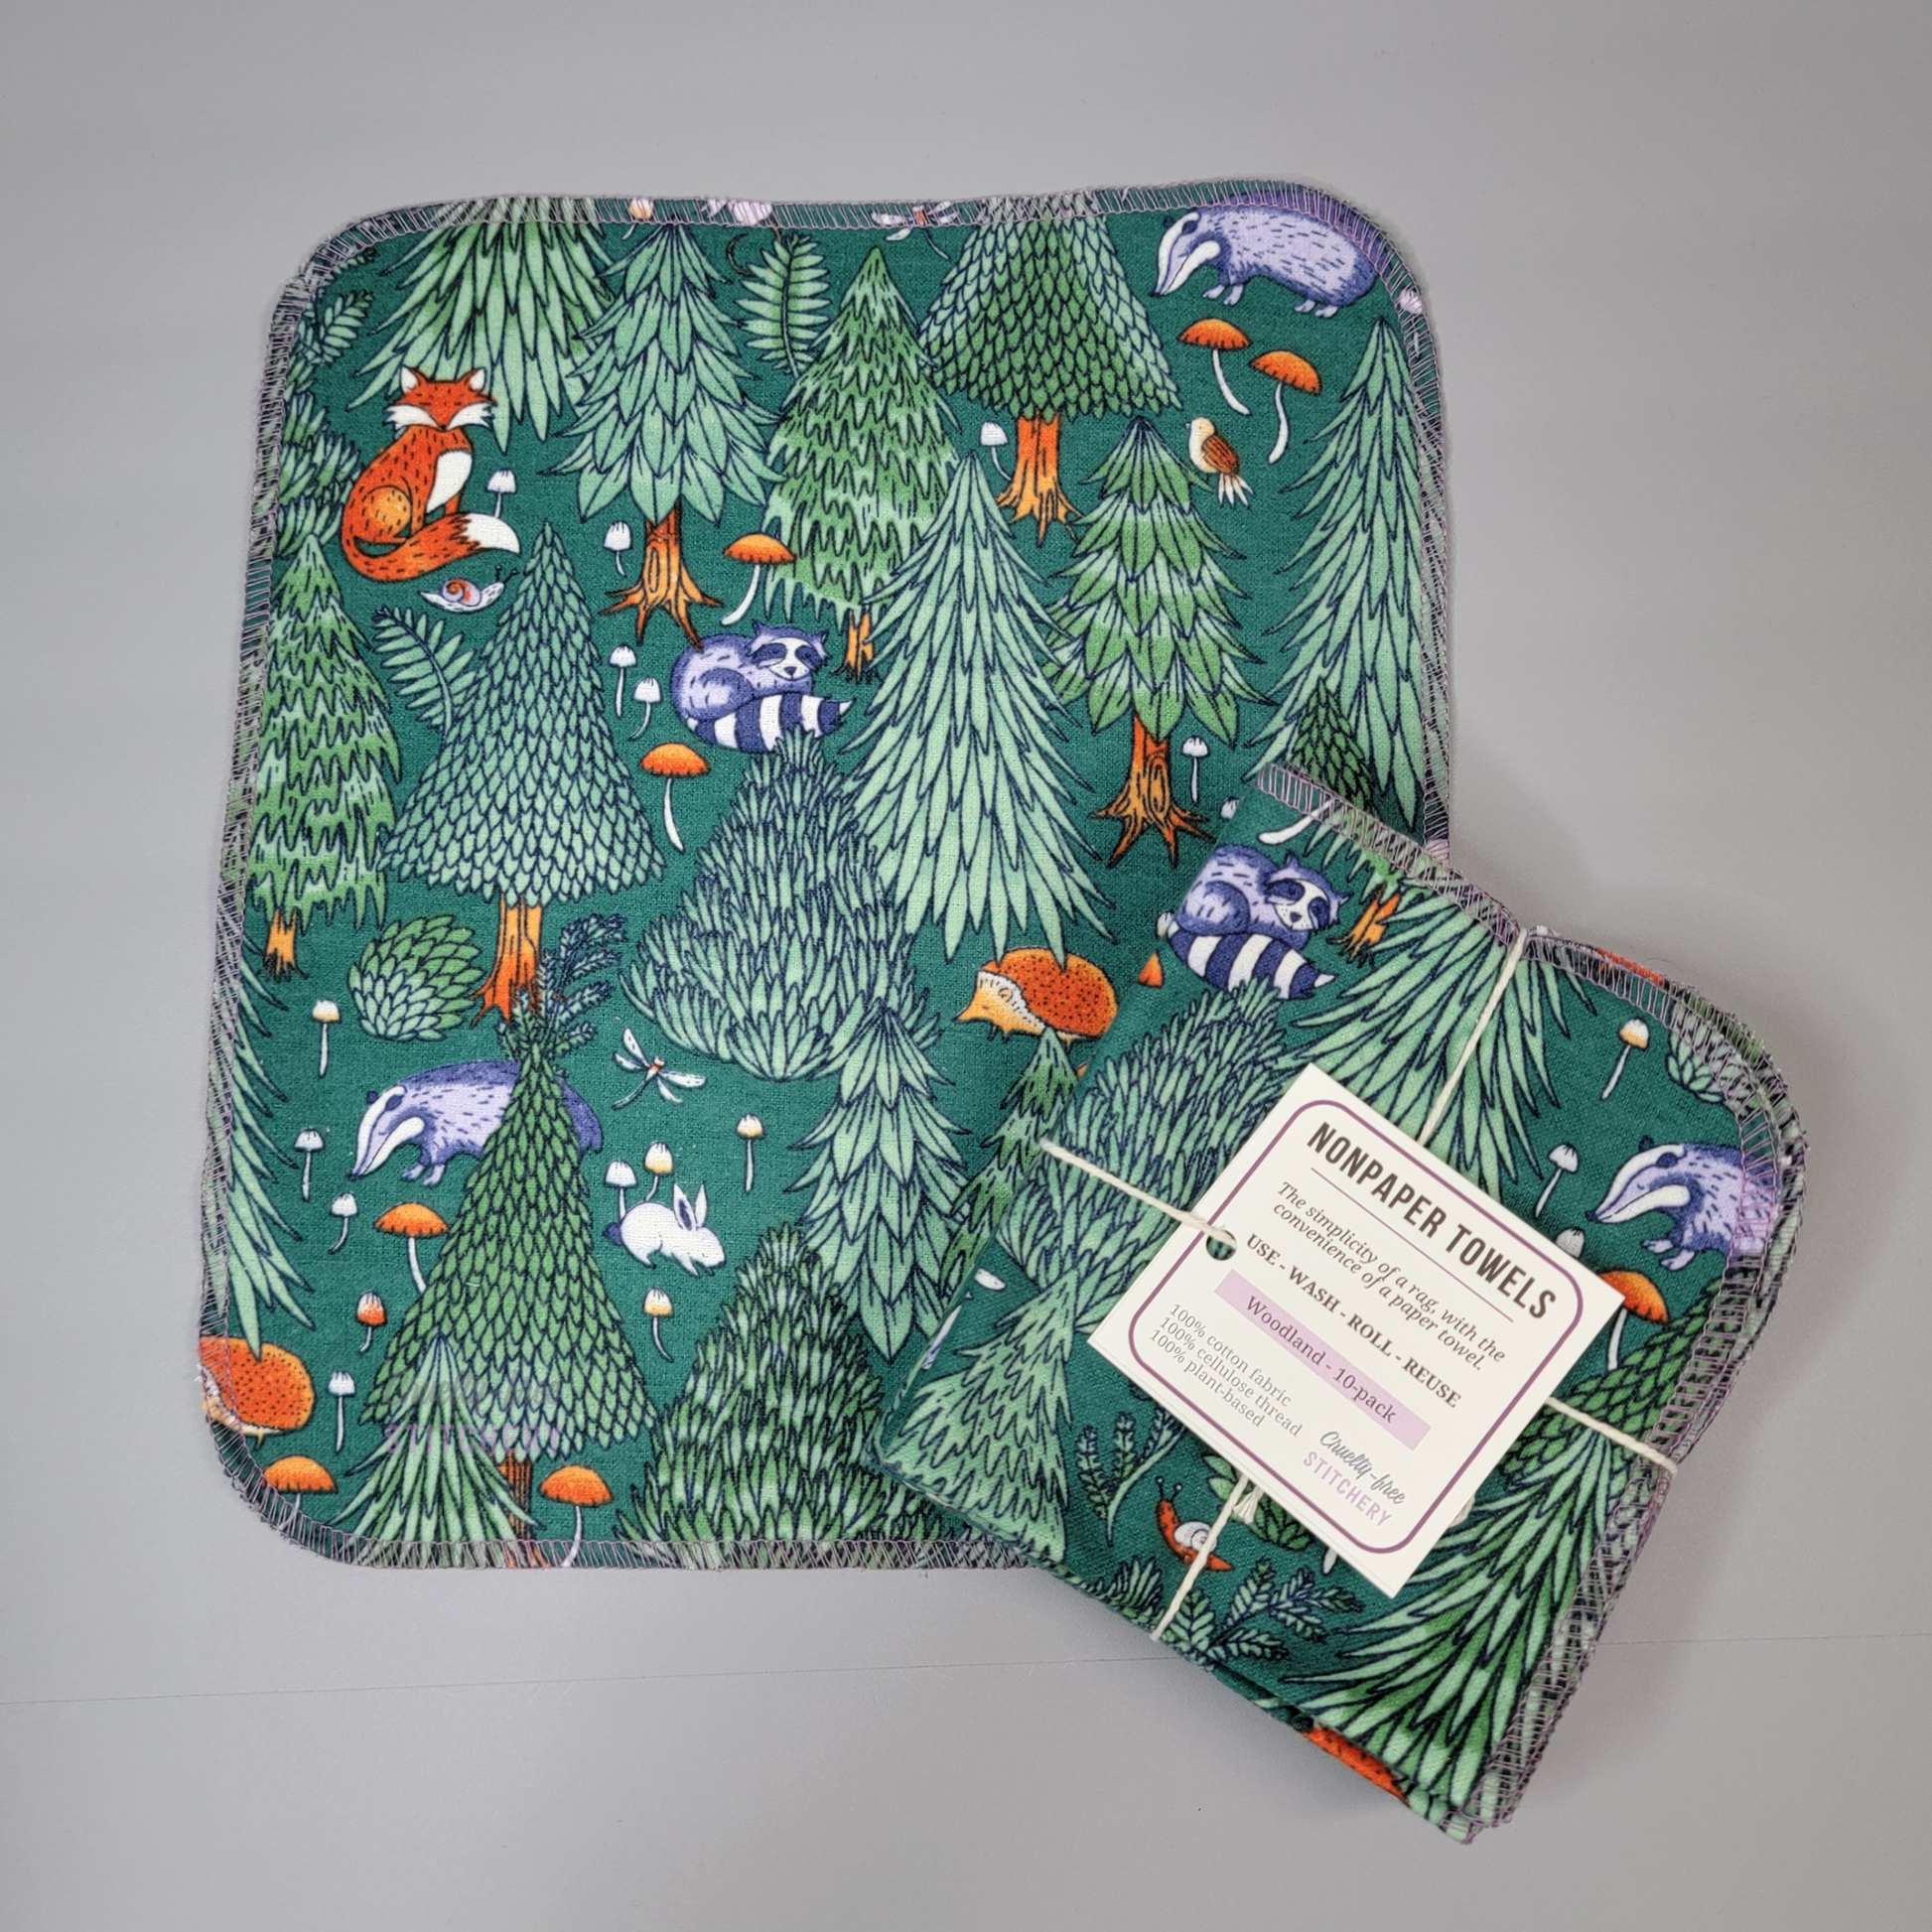 A woodland print NonPaper Towel laid flat next to a bundled pack. The bundle is tied with string and a tag like a gift.